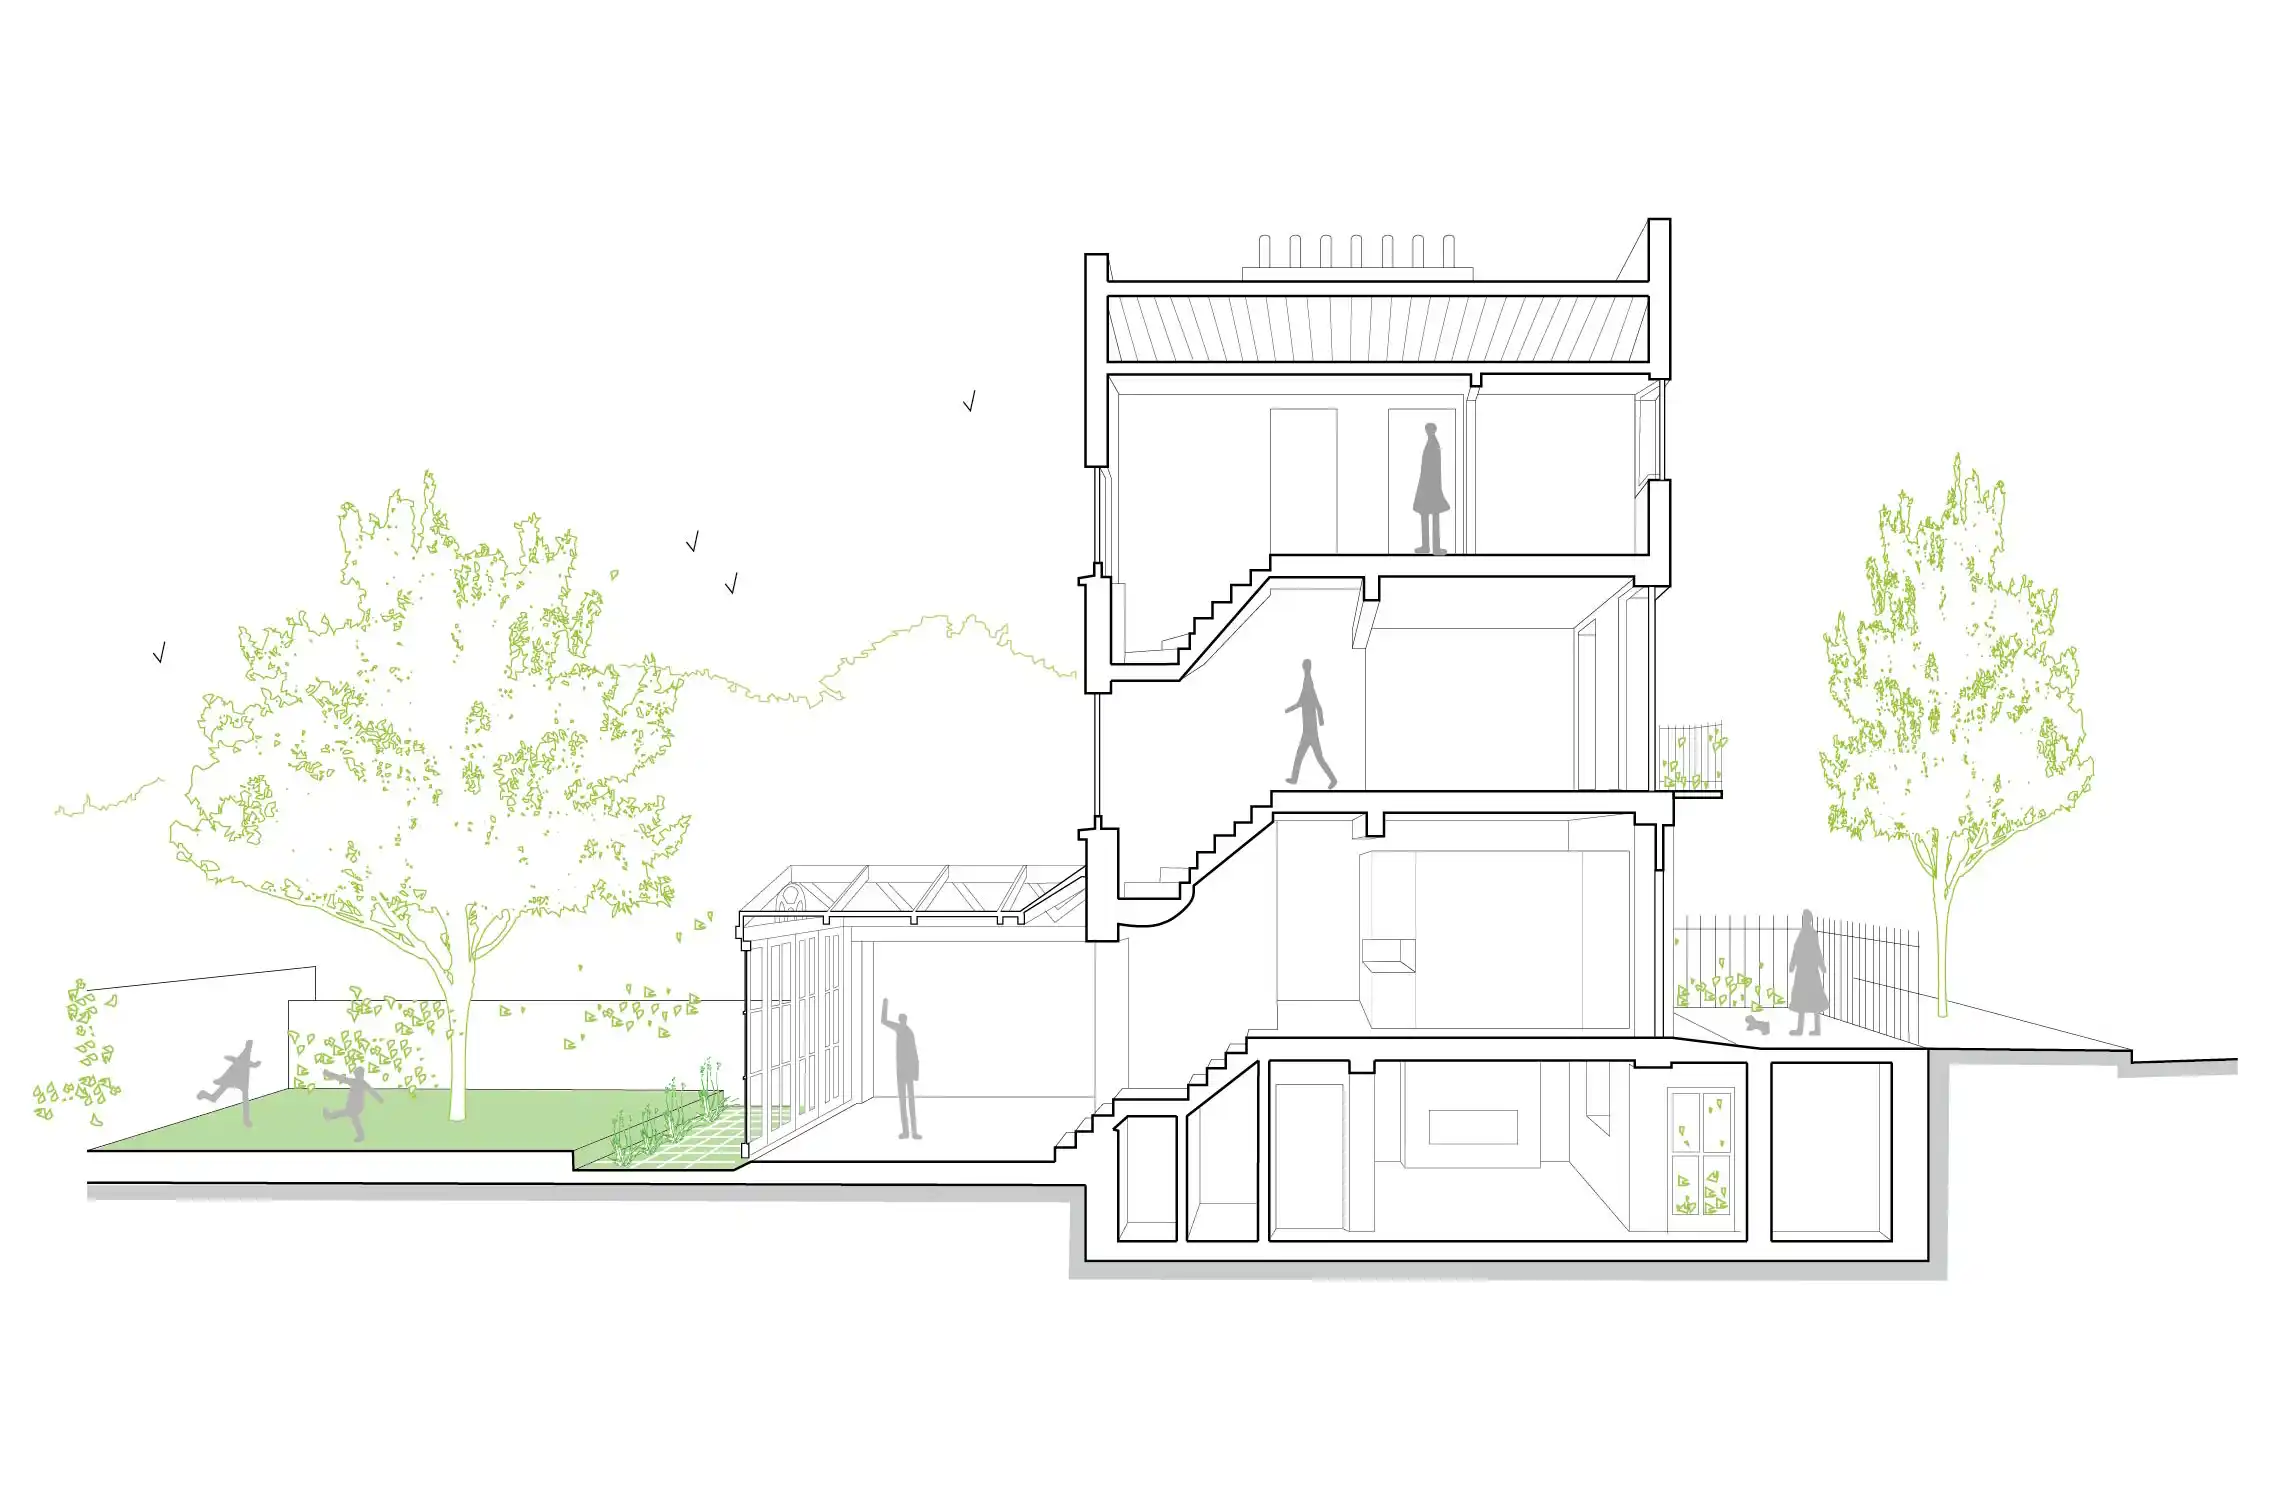 perspective section drawing through house from street to garden